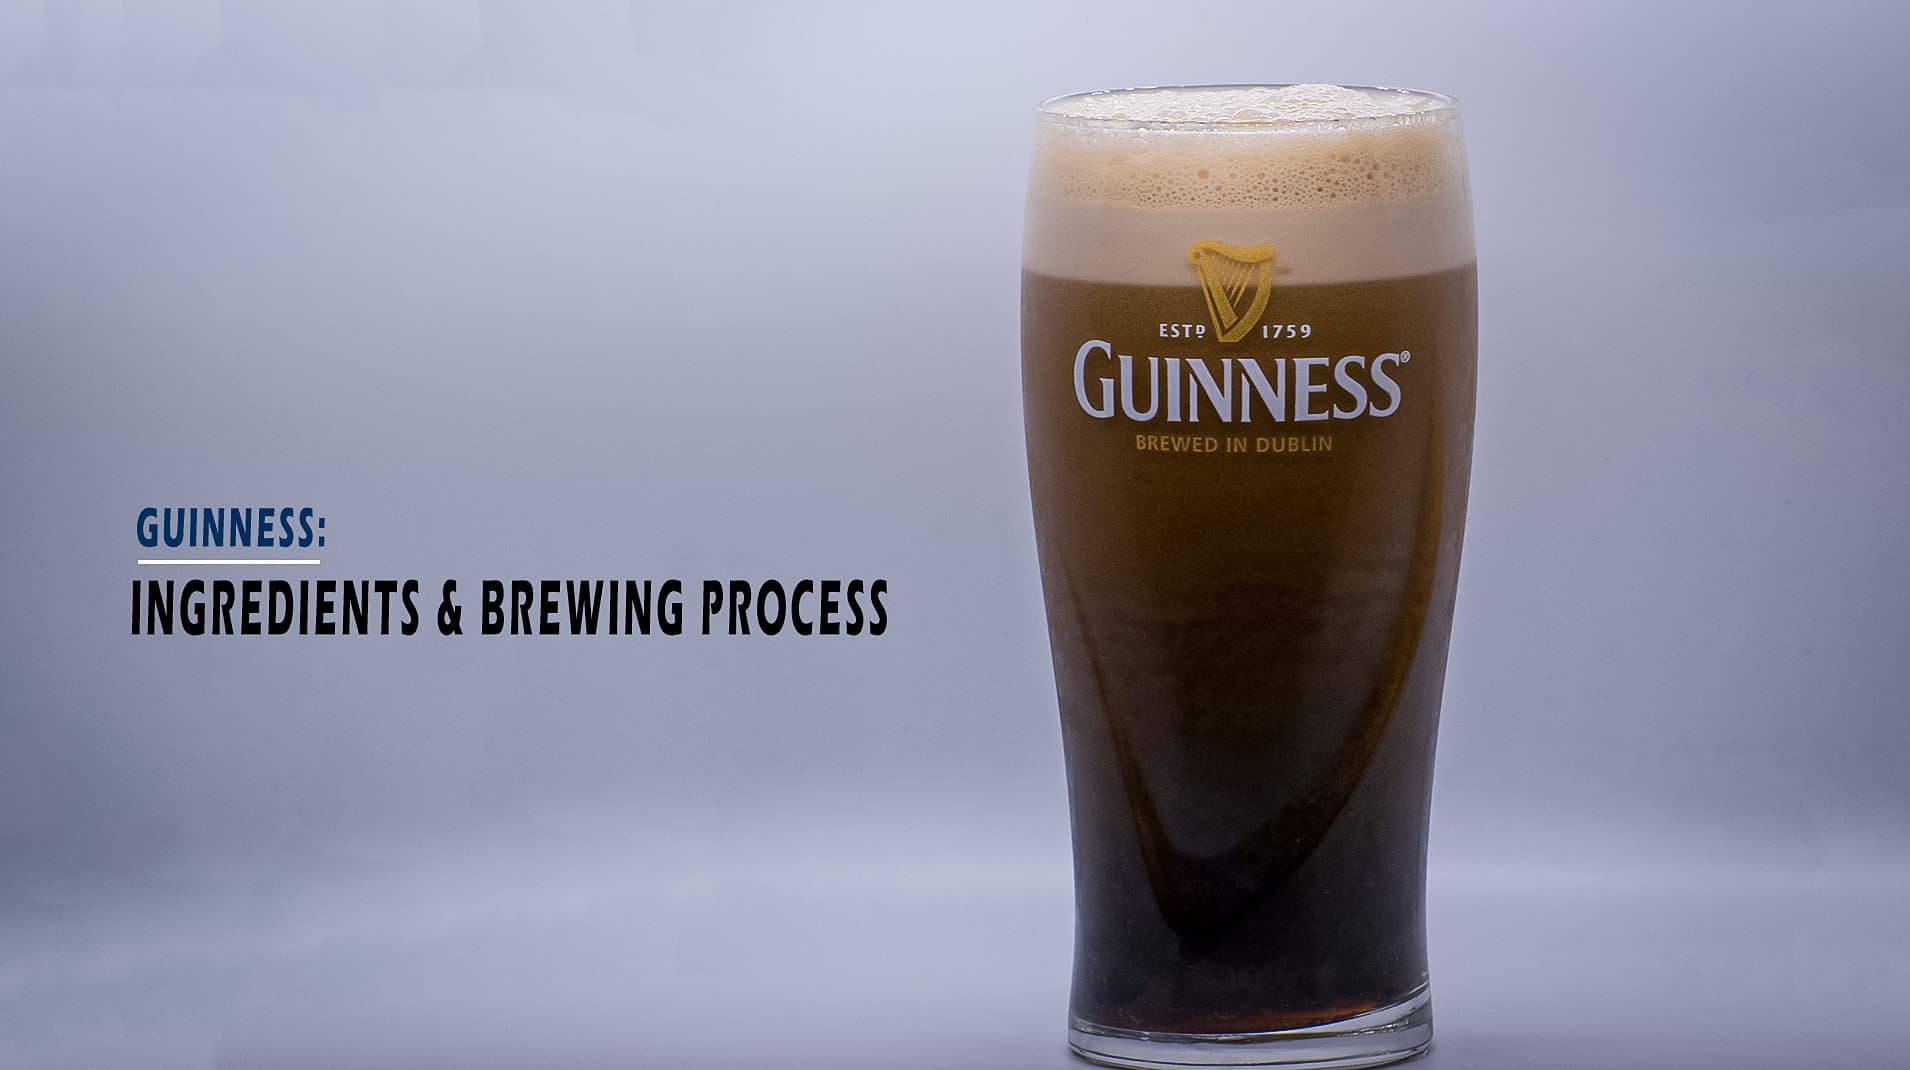 Guinness Ingredients & Brewing Process